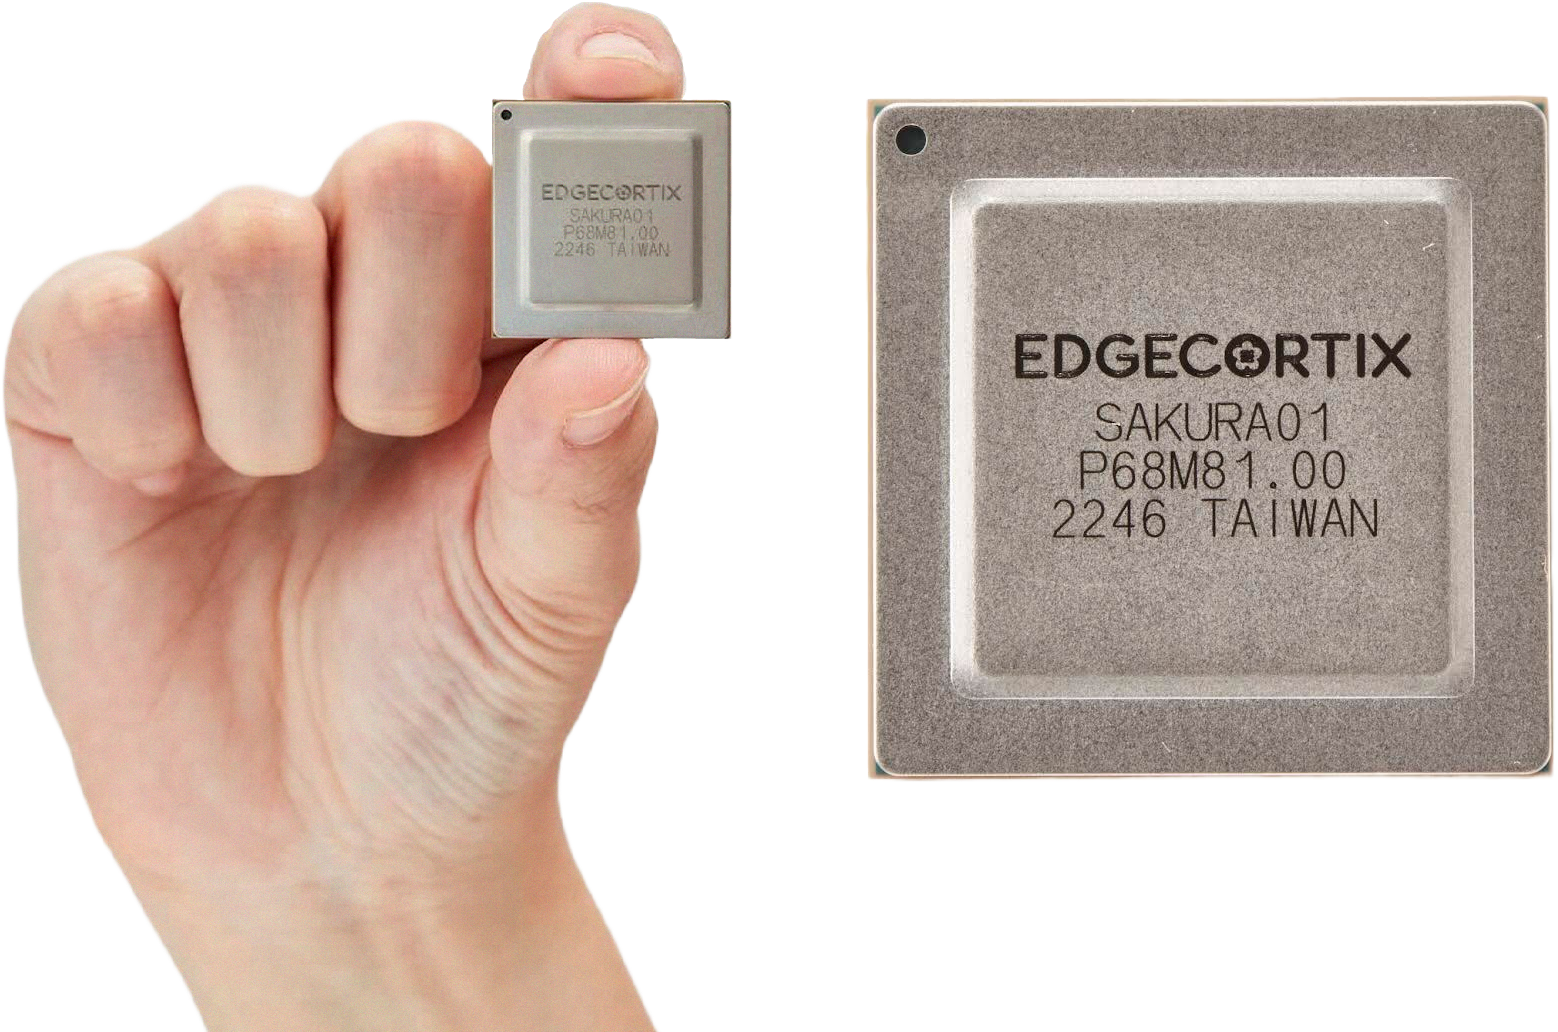 EdgeCortix SAKURA is an edge AI co-processor built in TSMC 12nm FinFET, delivering 40 TOPS @ 800 MHz in a TDP of 10W